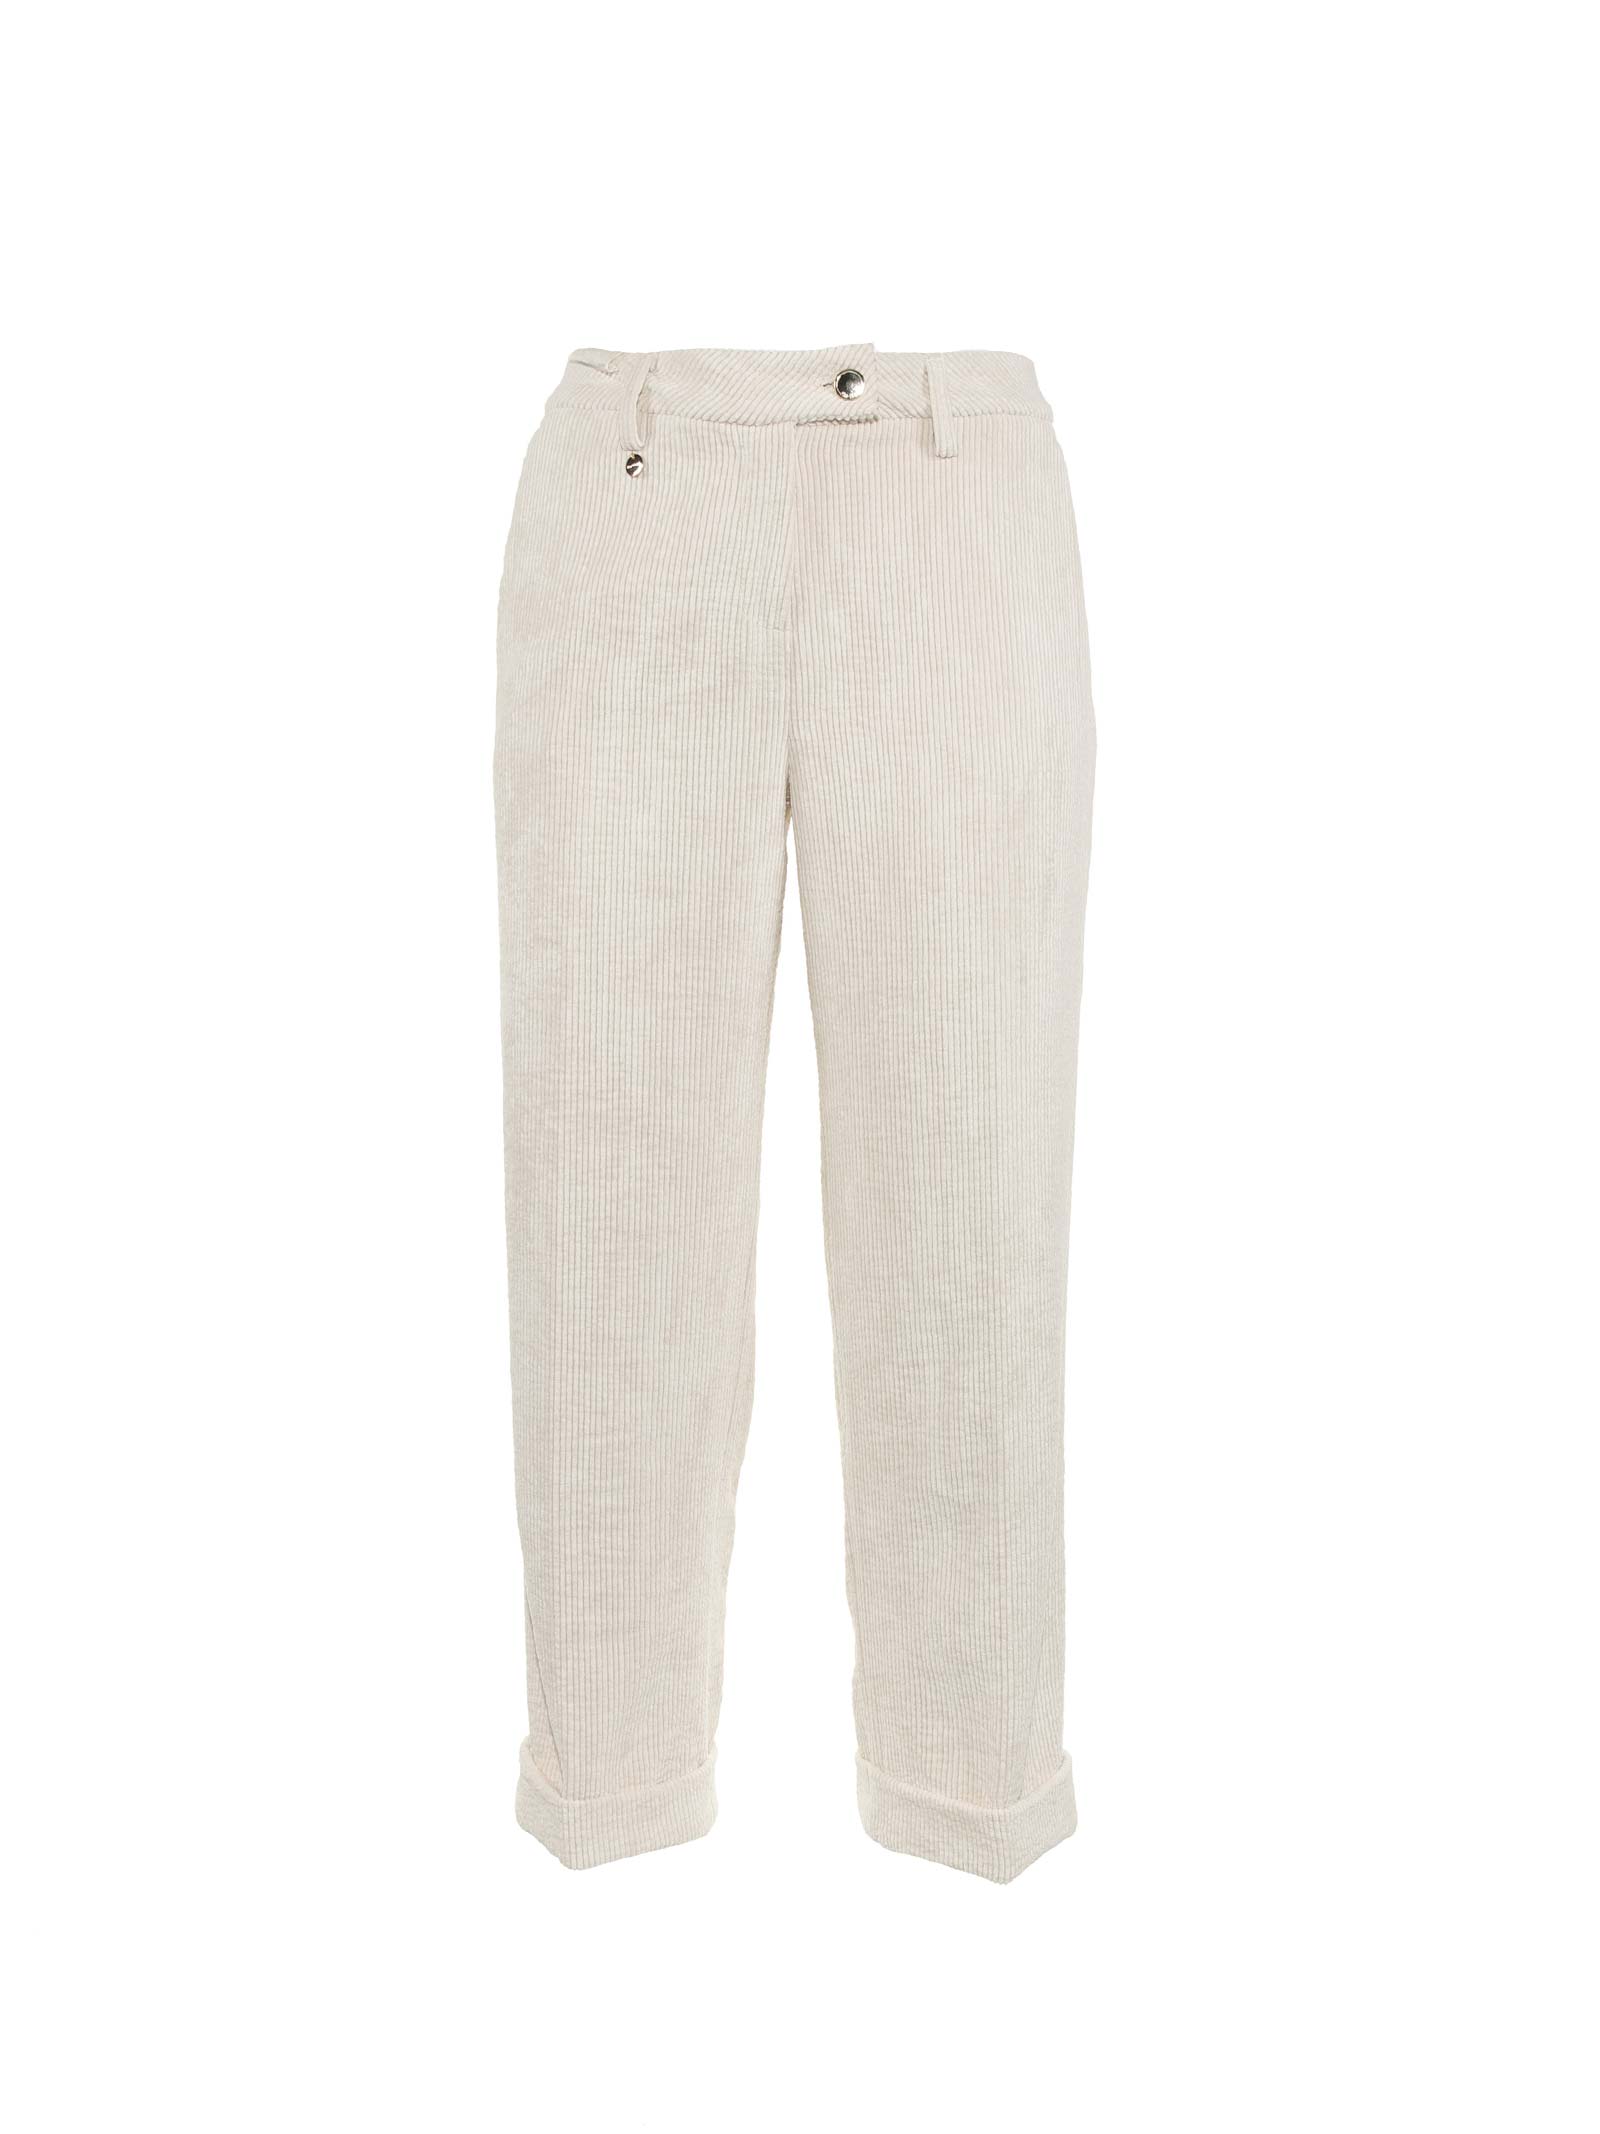 Re-HasH Cream White Nelly Trousers